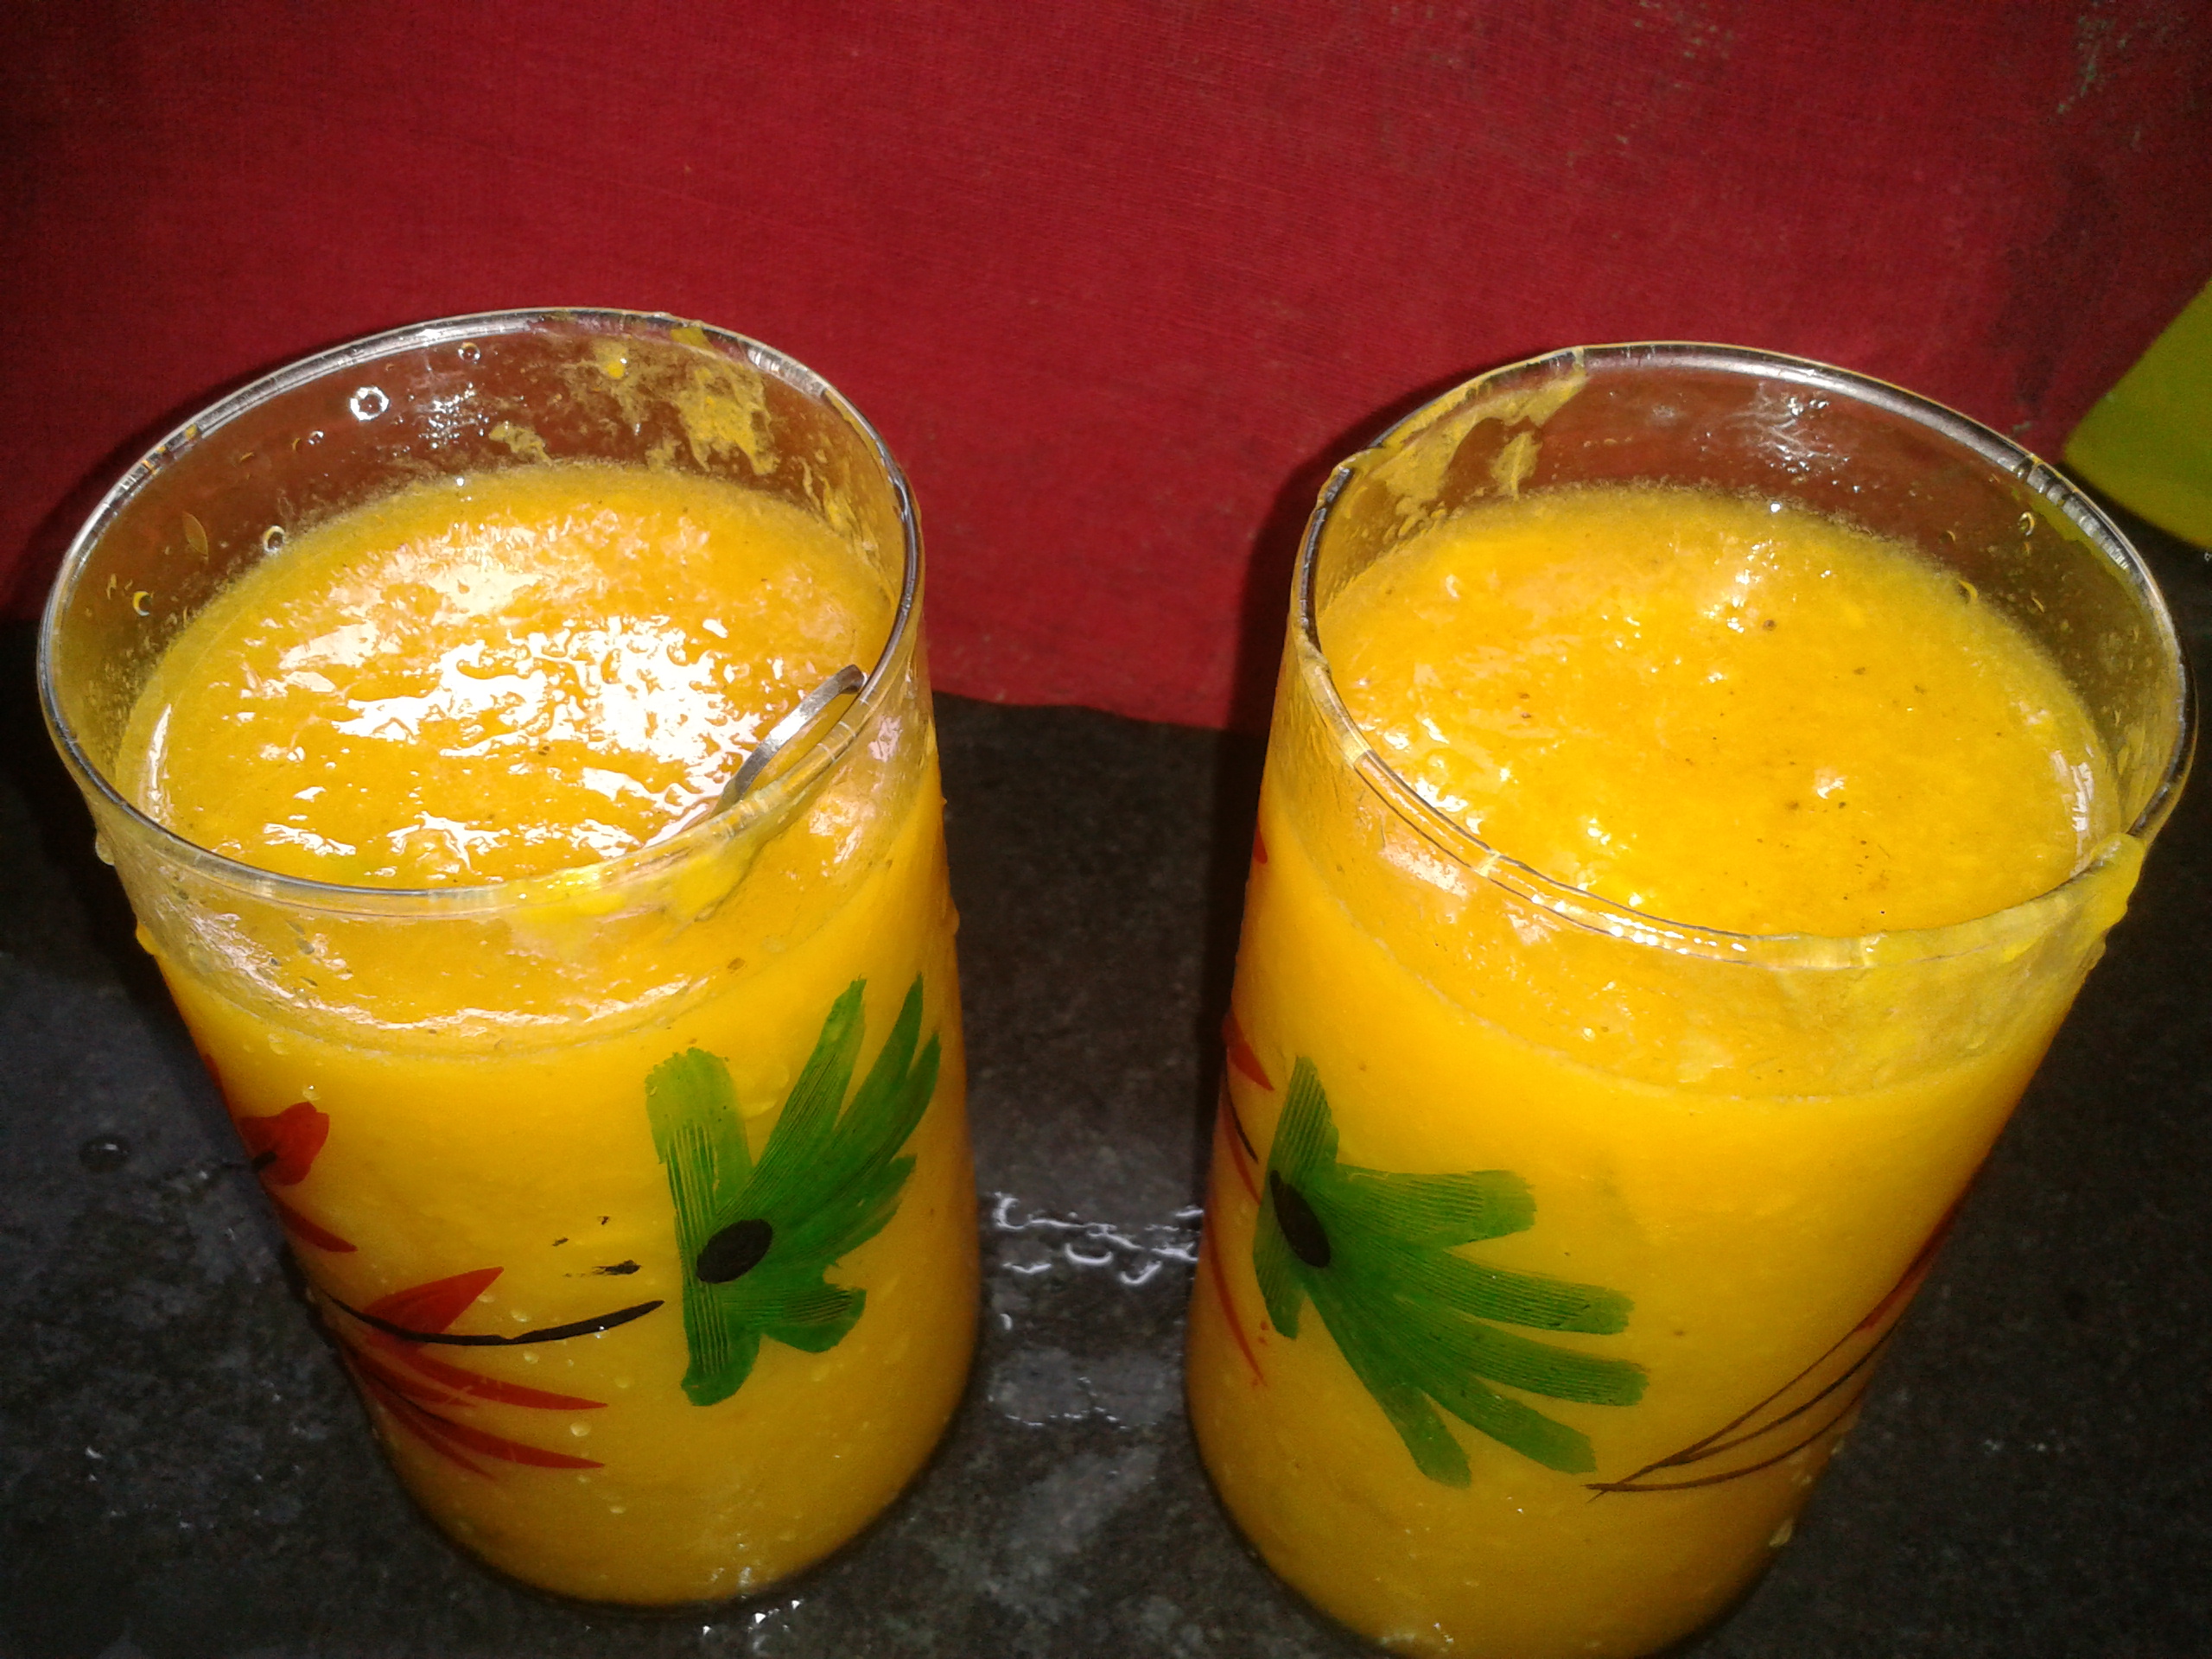 How to make Mango Smoothie Delights?